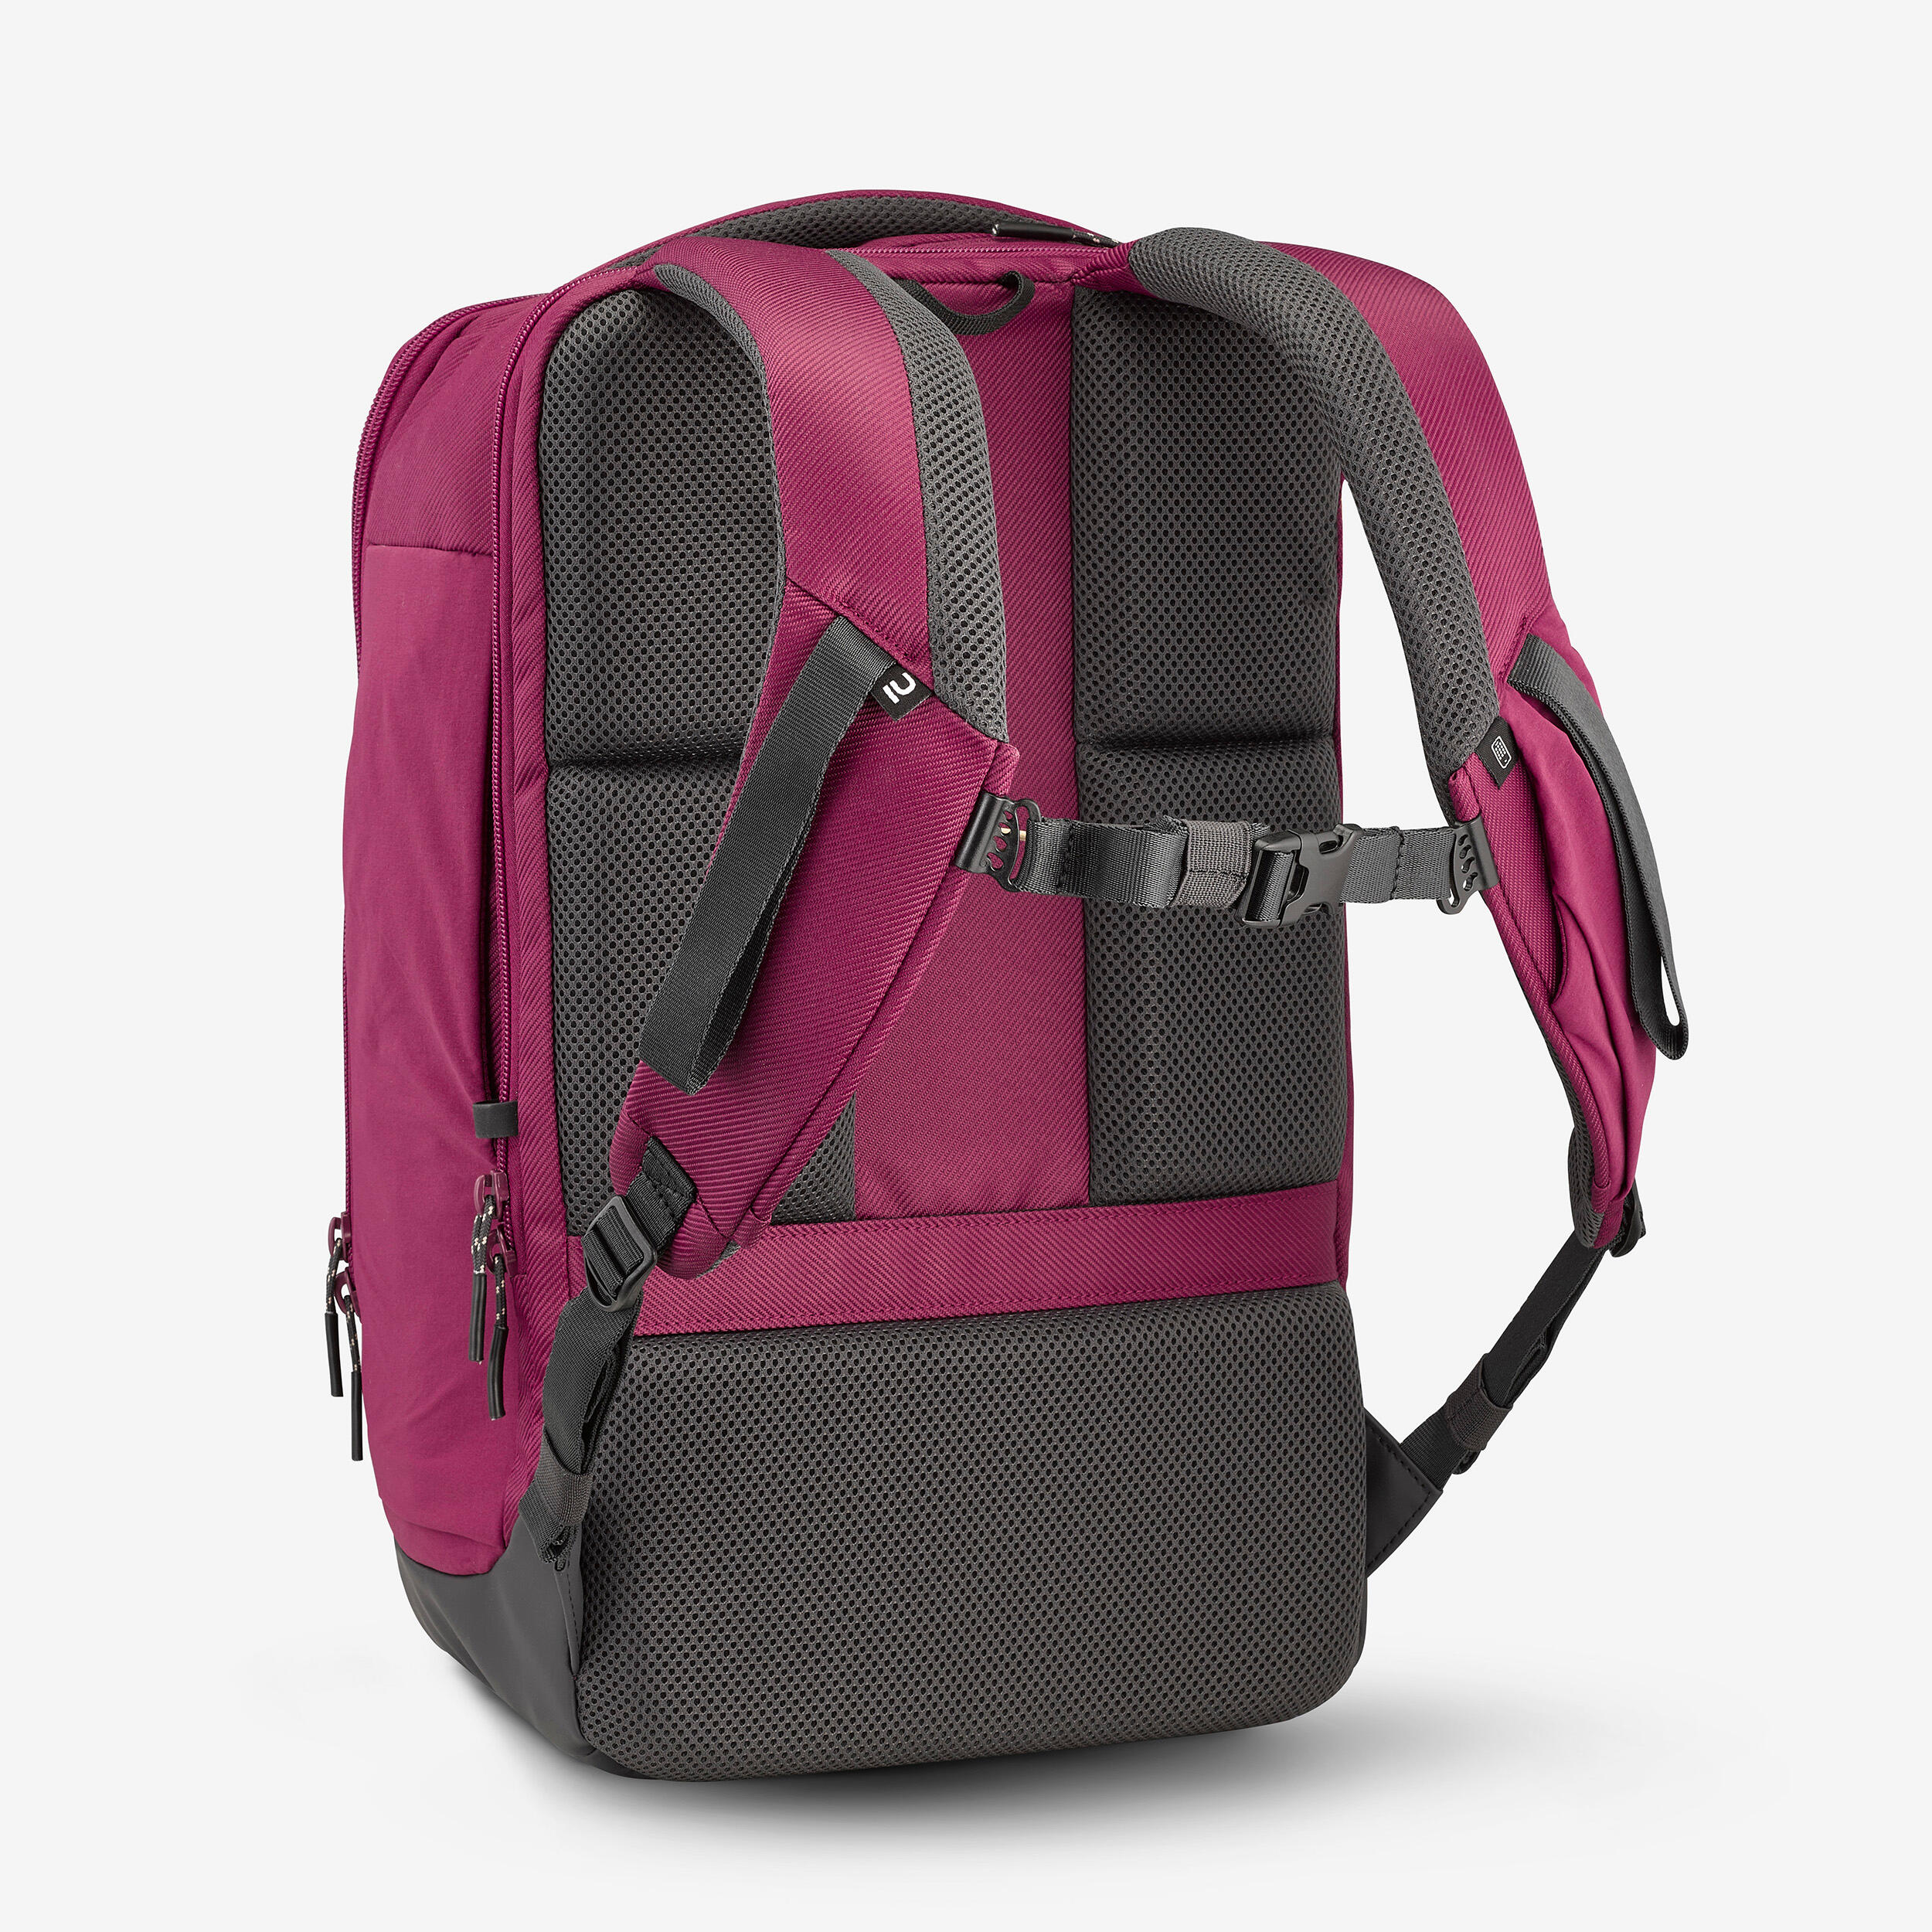 Mad About Fishing Dry Backpack 25L Pink/Black - Action Outdoors